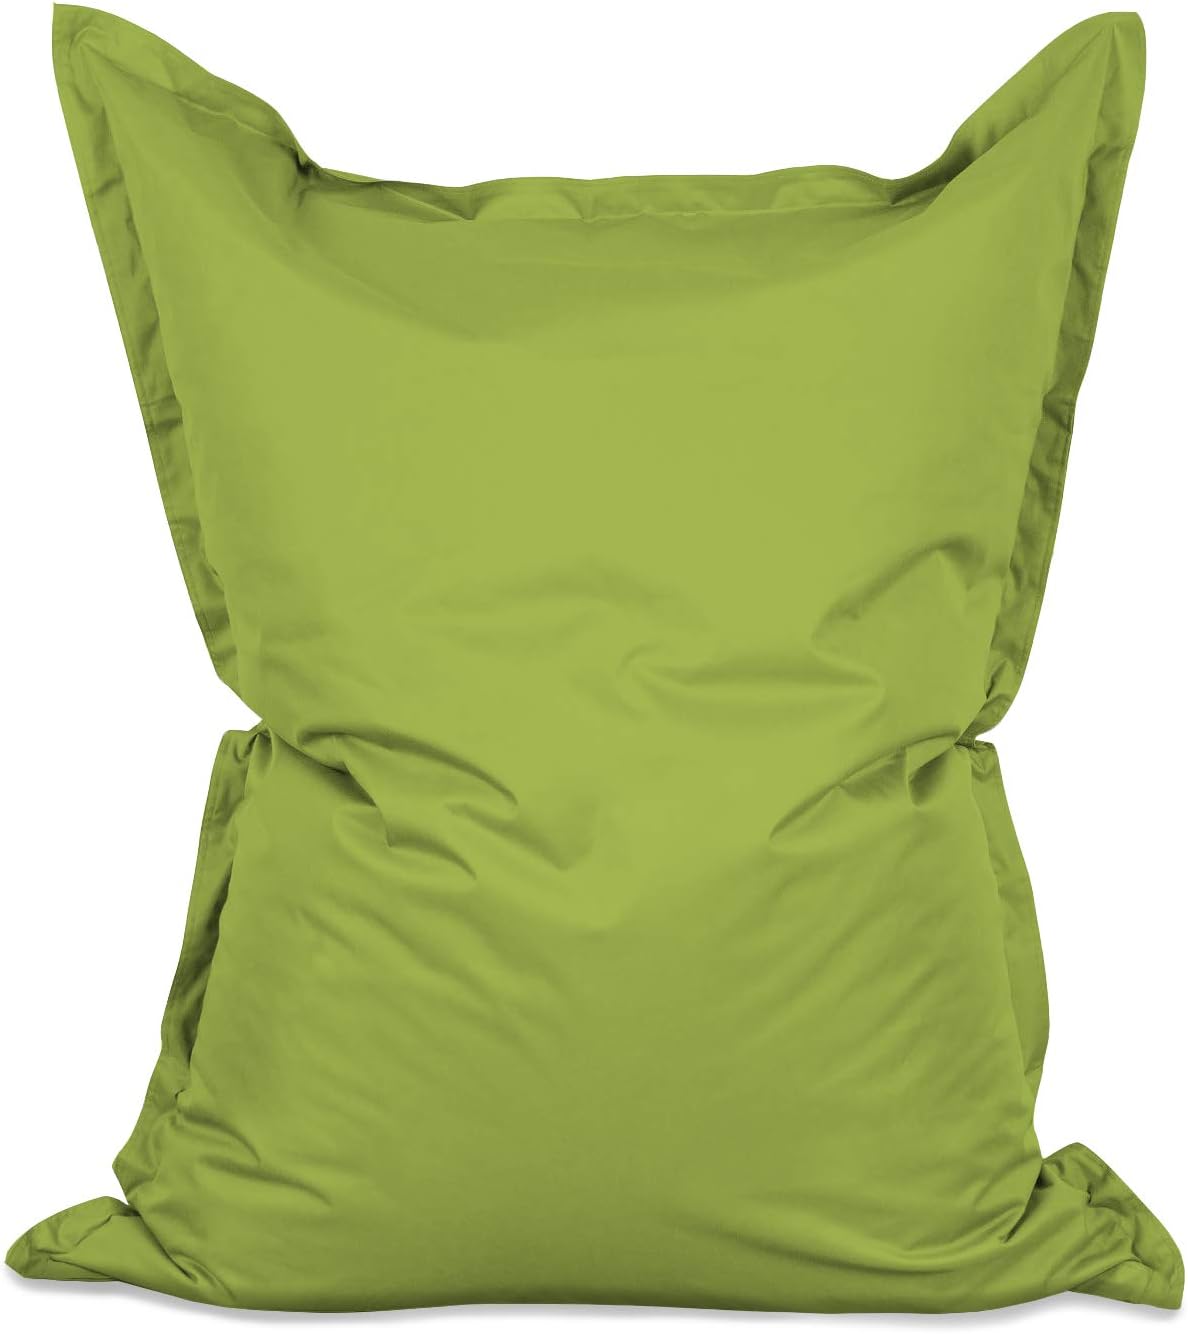 ink craft Refreshing Green Retreat Square Bean Bag Cover Without Beans for Home, Office, and Bedroom – Contemporary and Comfortable Seating in a Modern Design